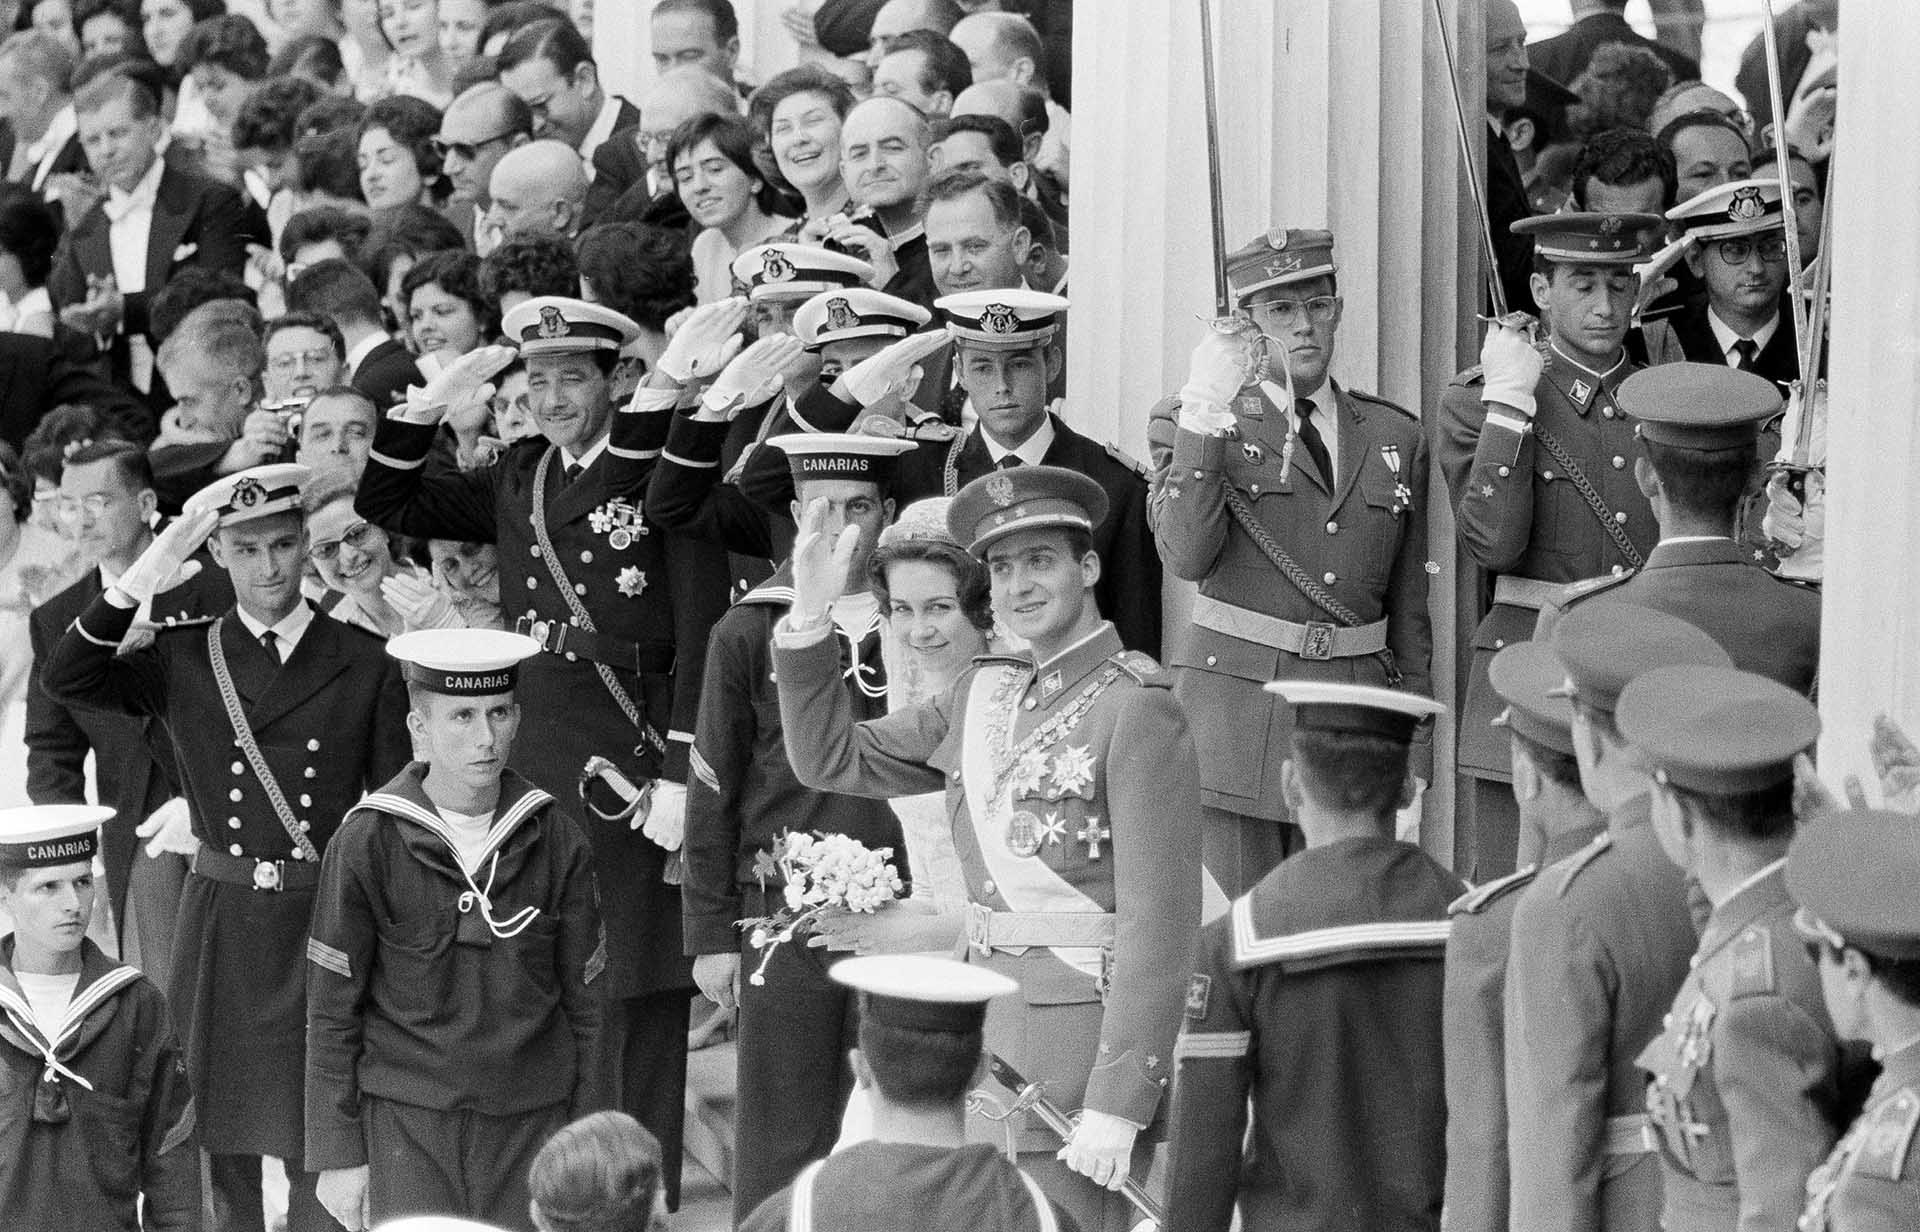 Prince Juan Carlos of Spain, with his bride, Princess Sophia of Greece, waves to onlookers in Athens, Greece, May 14, 1962, following wedding ceremony at St. Denis Roman Catholic Cathedral. (AP Photo/Pool)